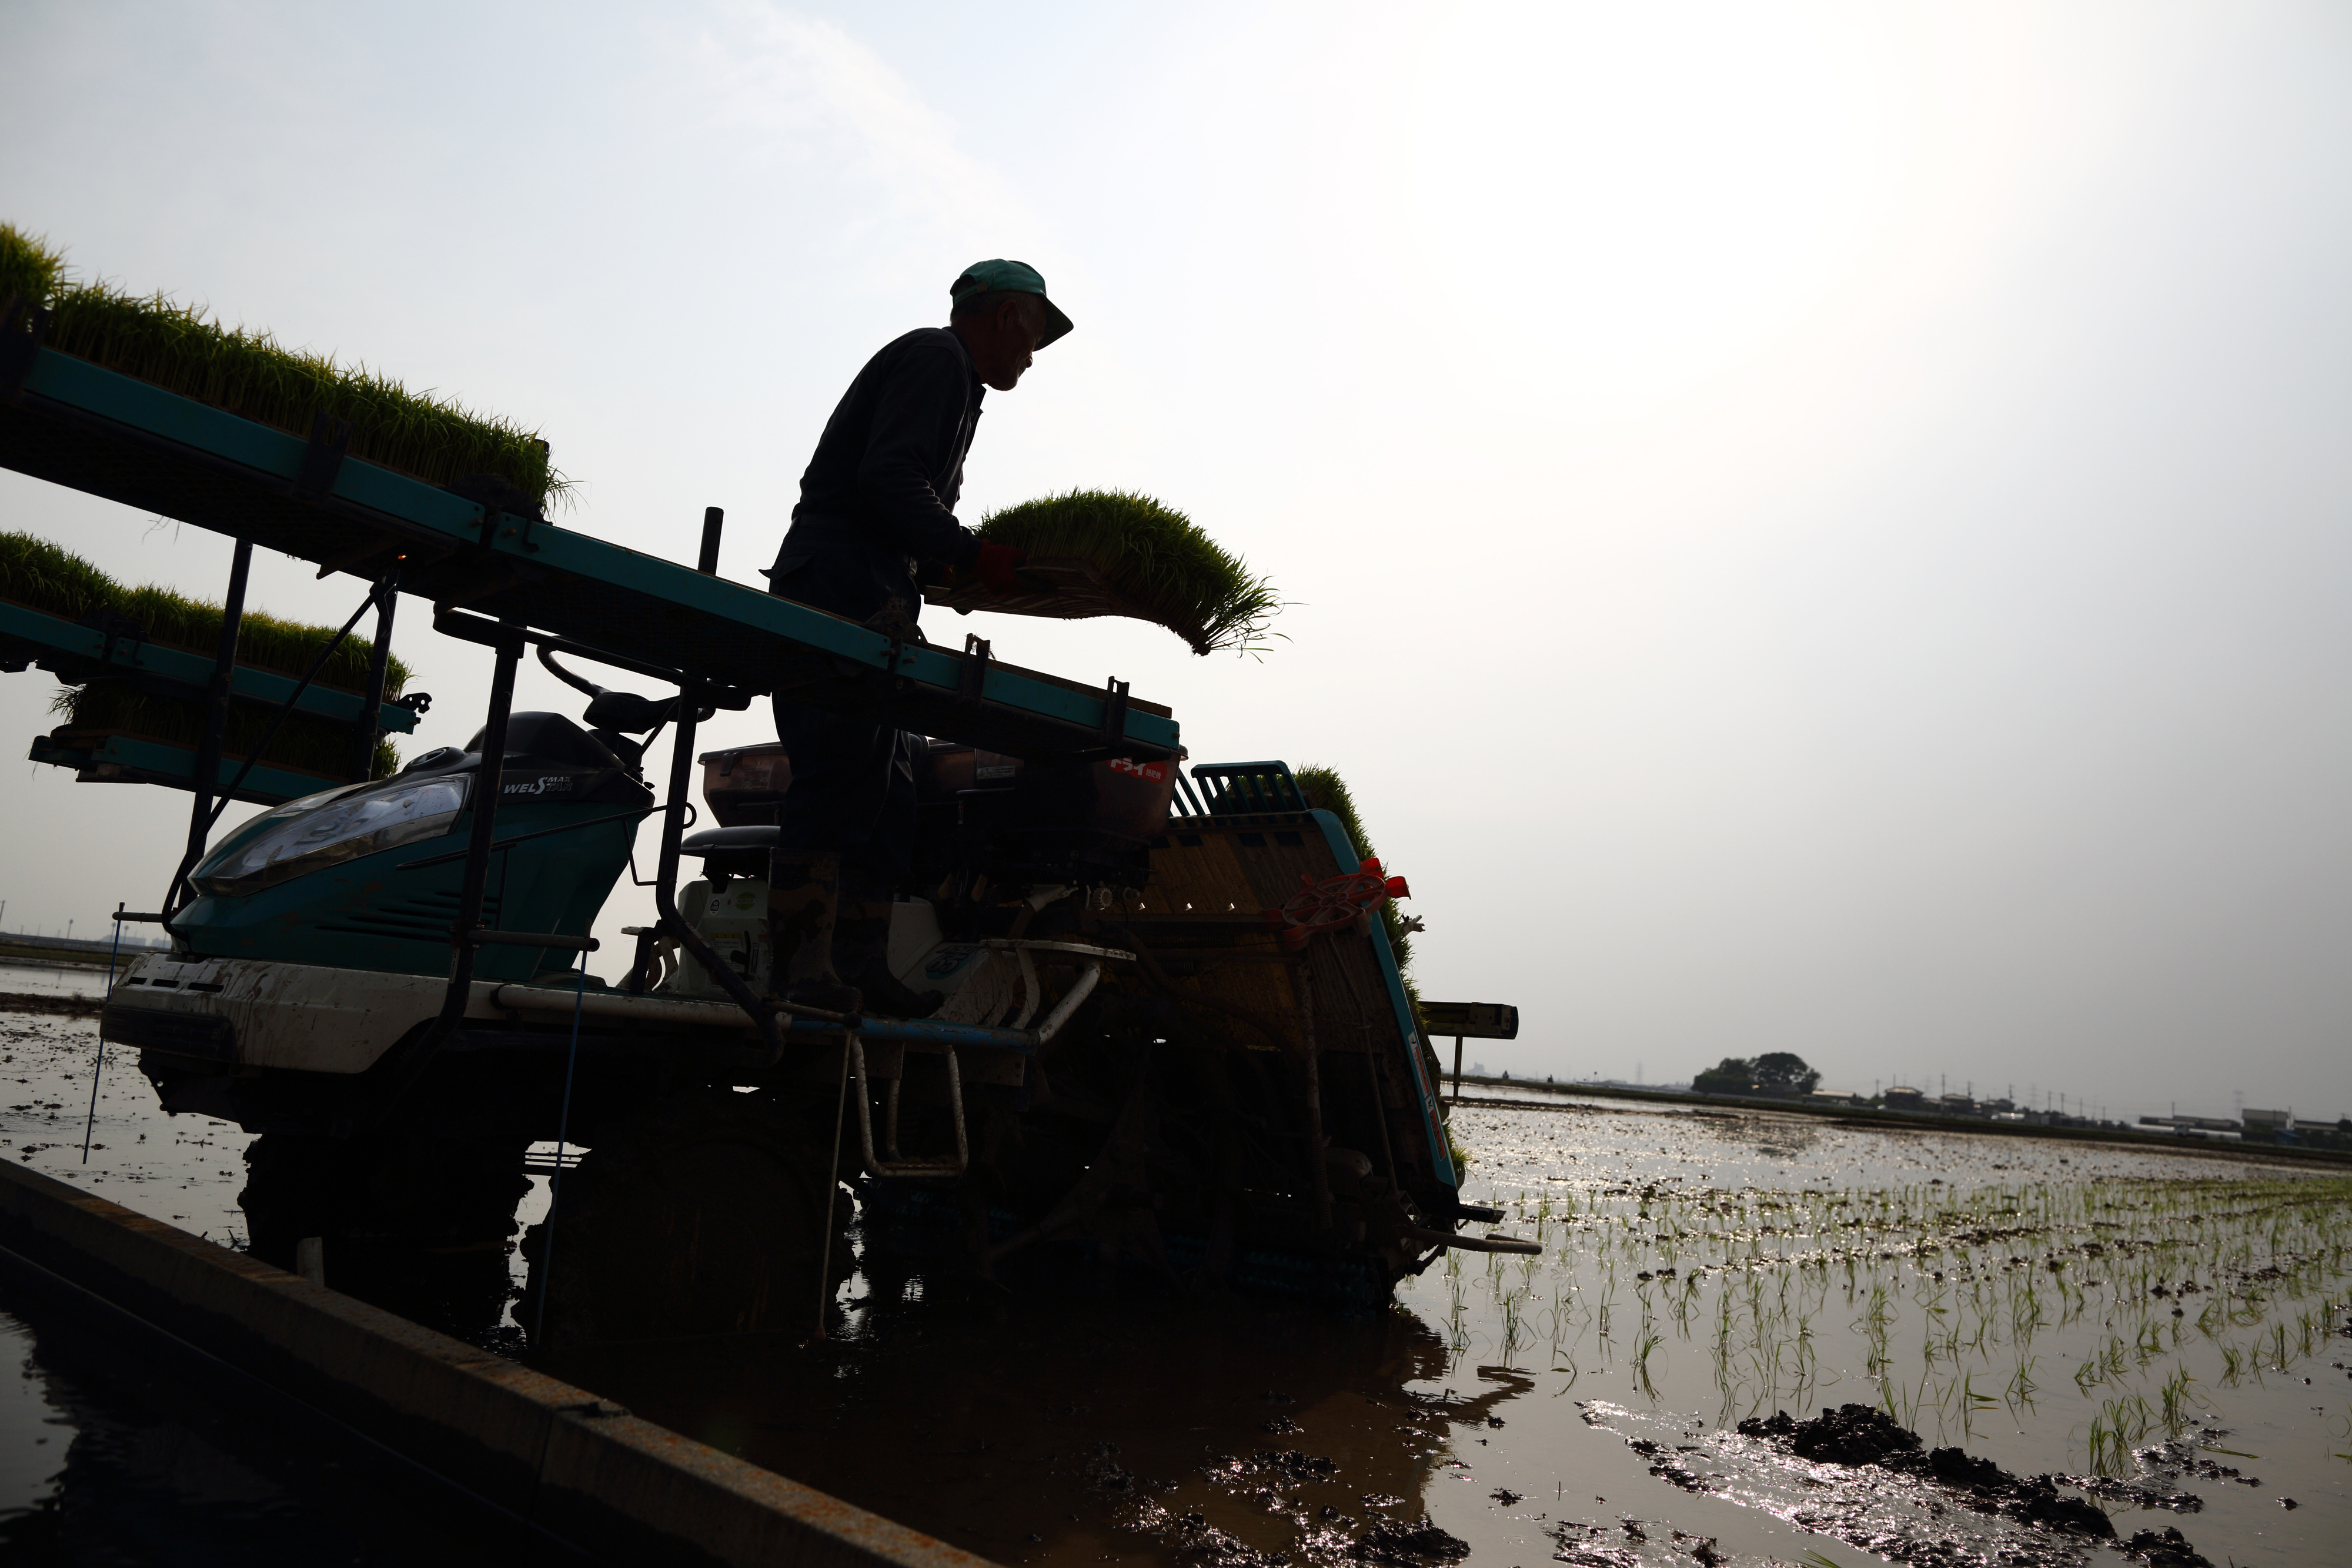 A farmer stands on a transplanter while preparing rice seedlings in a paddy in Saitama Prefecture on Sunday. | BLOOMBERG